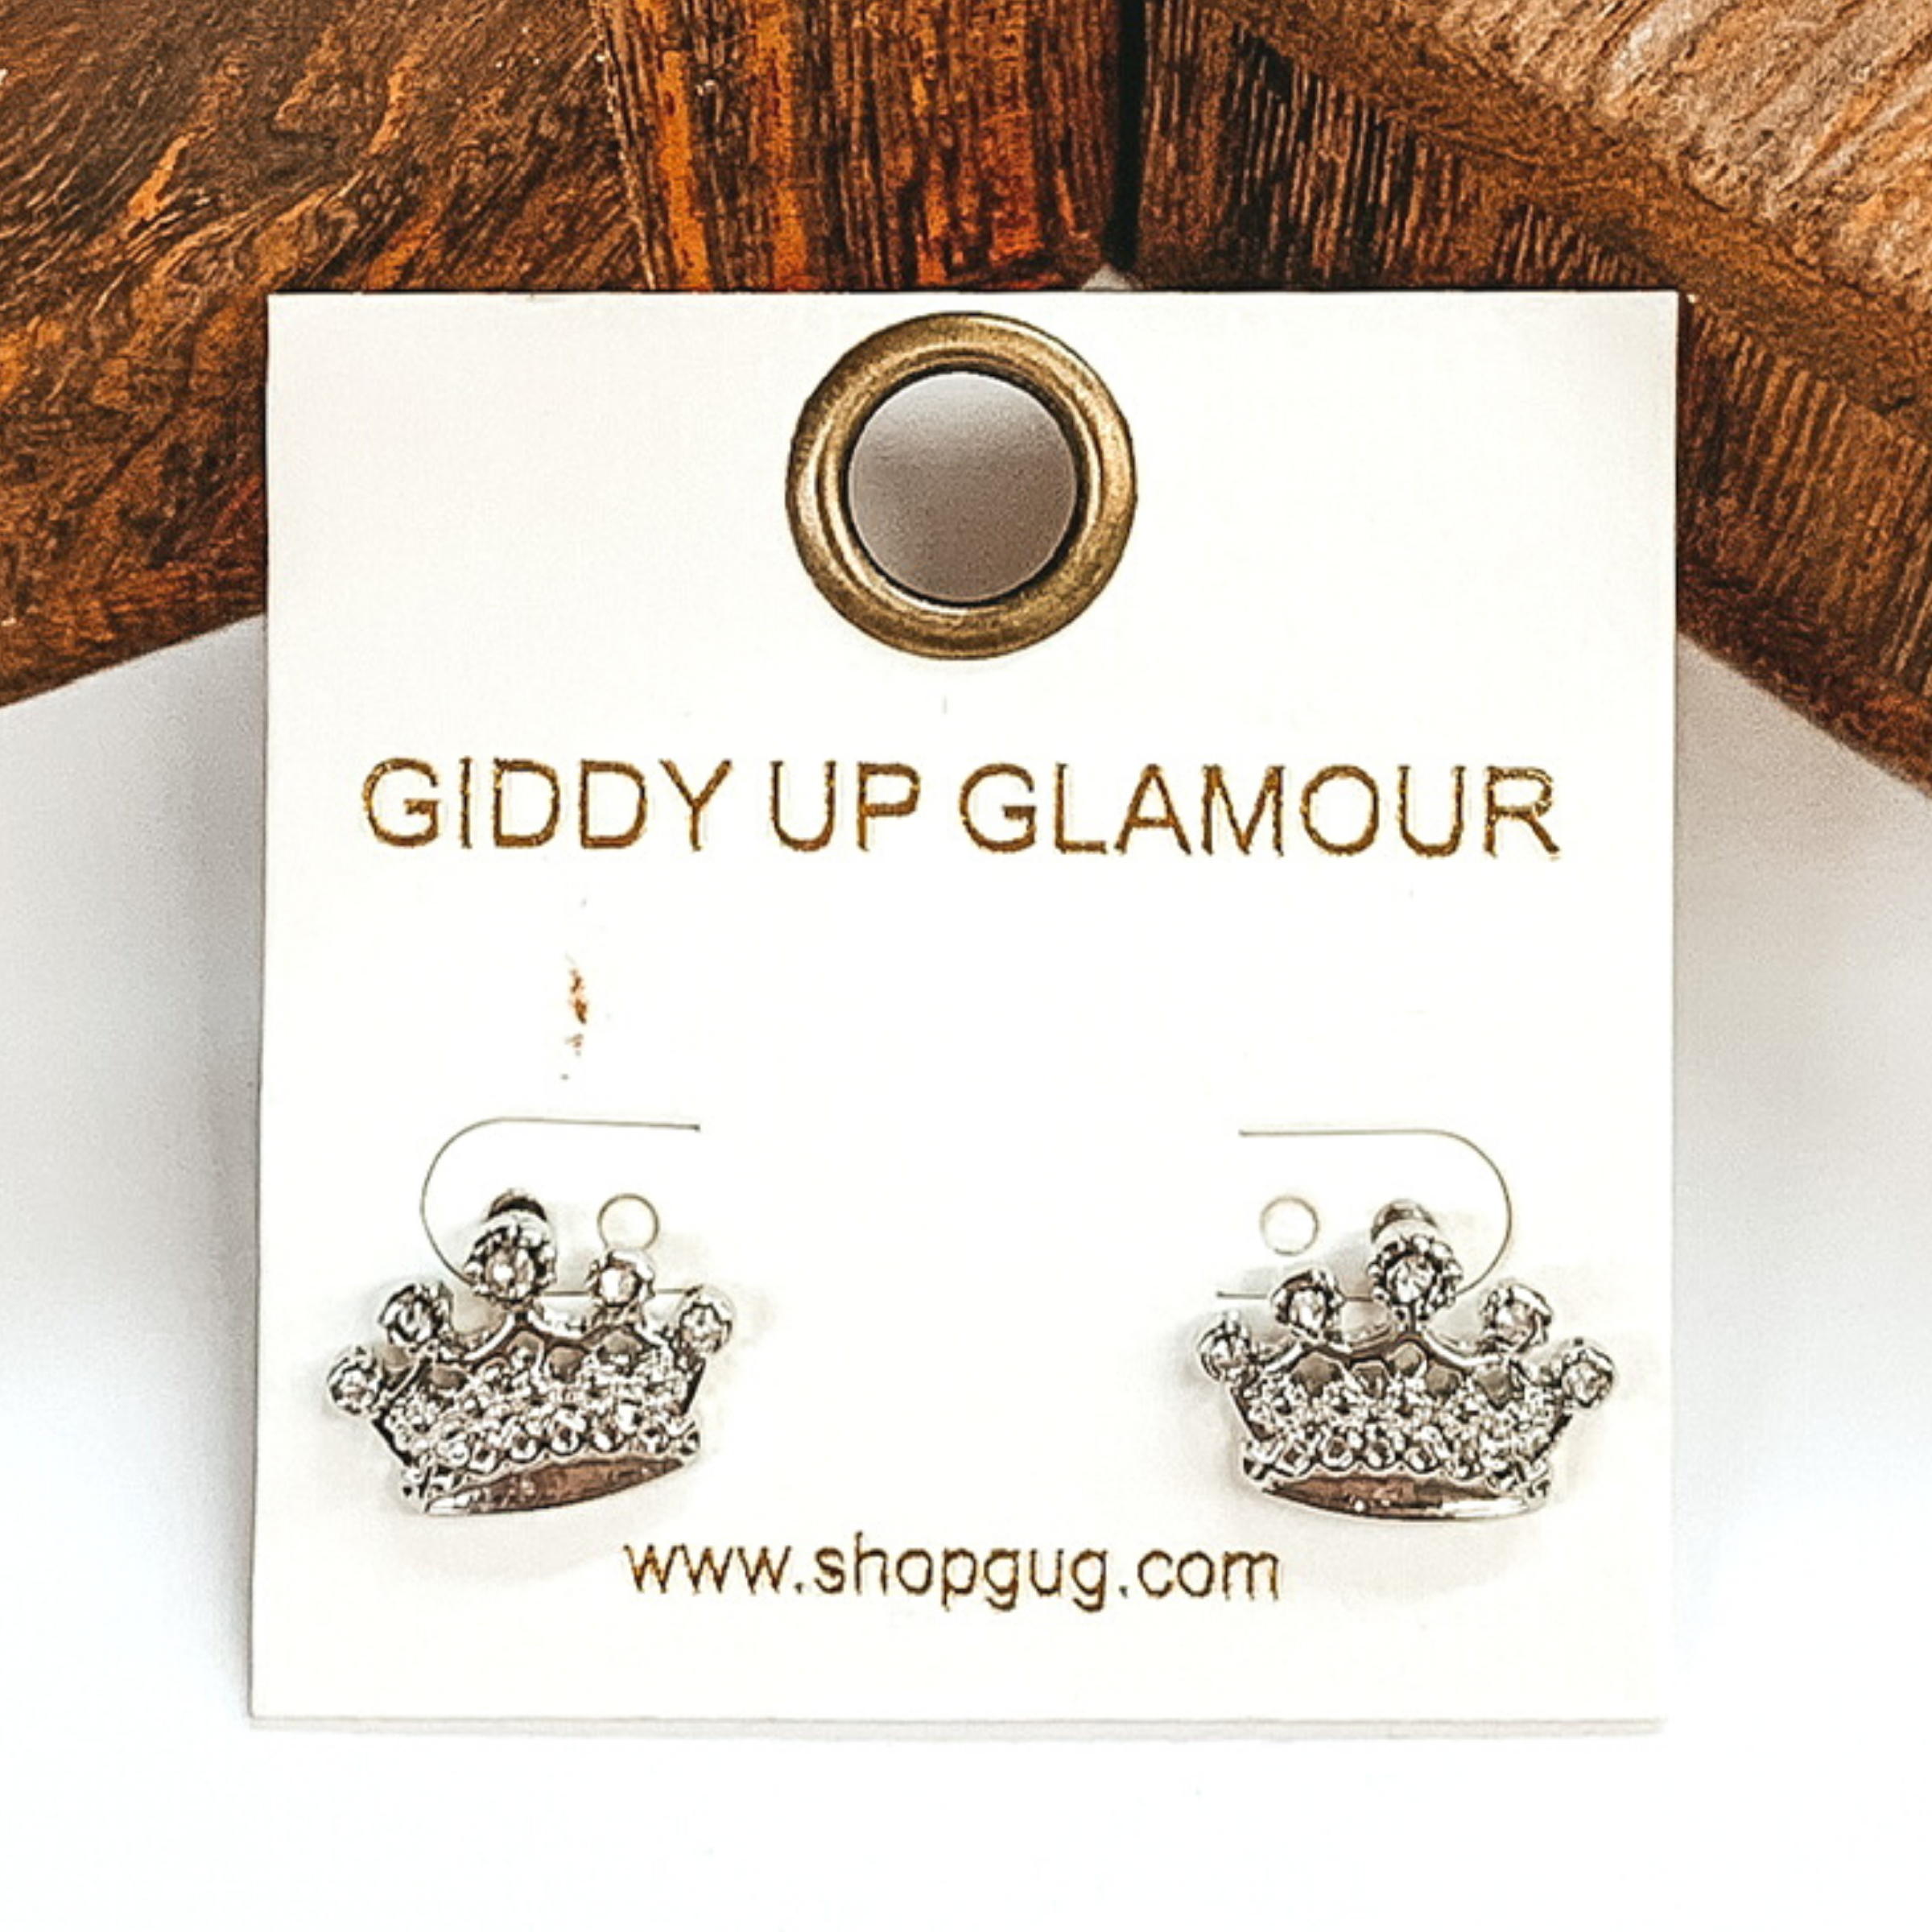 Silver crown stud earrings with clear crystals. These earrings are pictured on a white and brown background. 